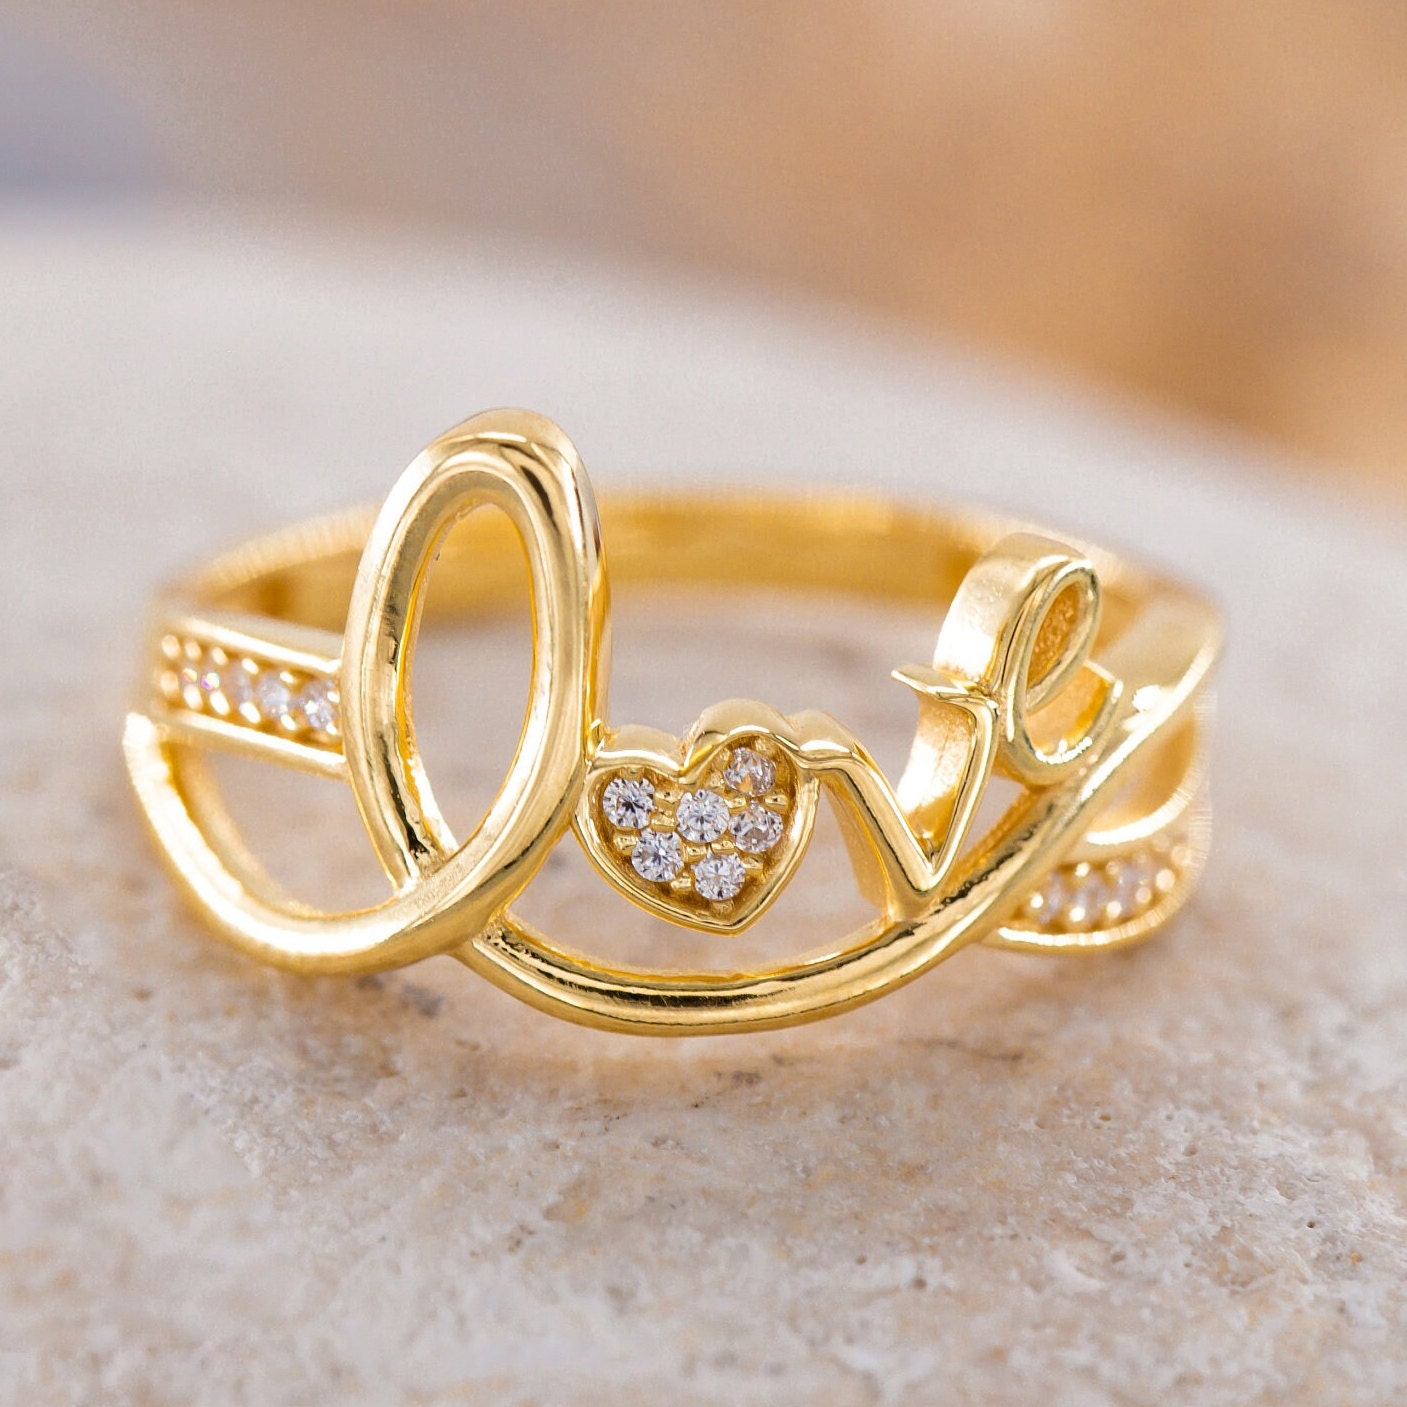 Heart Shaped 18K Gold Amazon Ring Solid Filled, Cute Love Word Art For  Womens Statement, Engagement, Party Jewelry From Xinpengbusiness, $2.81 |  DHgate.Com